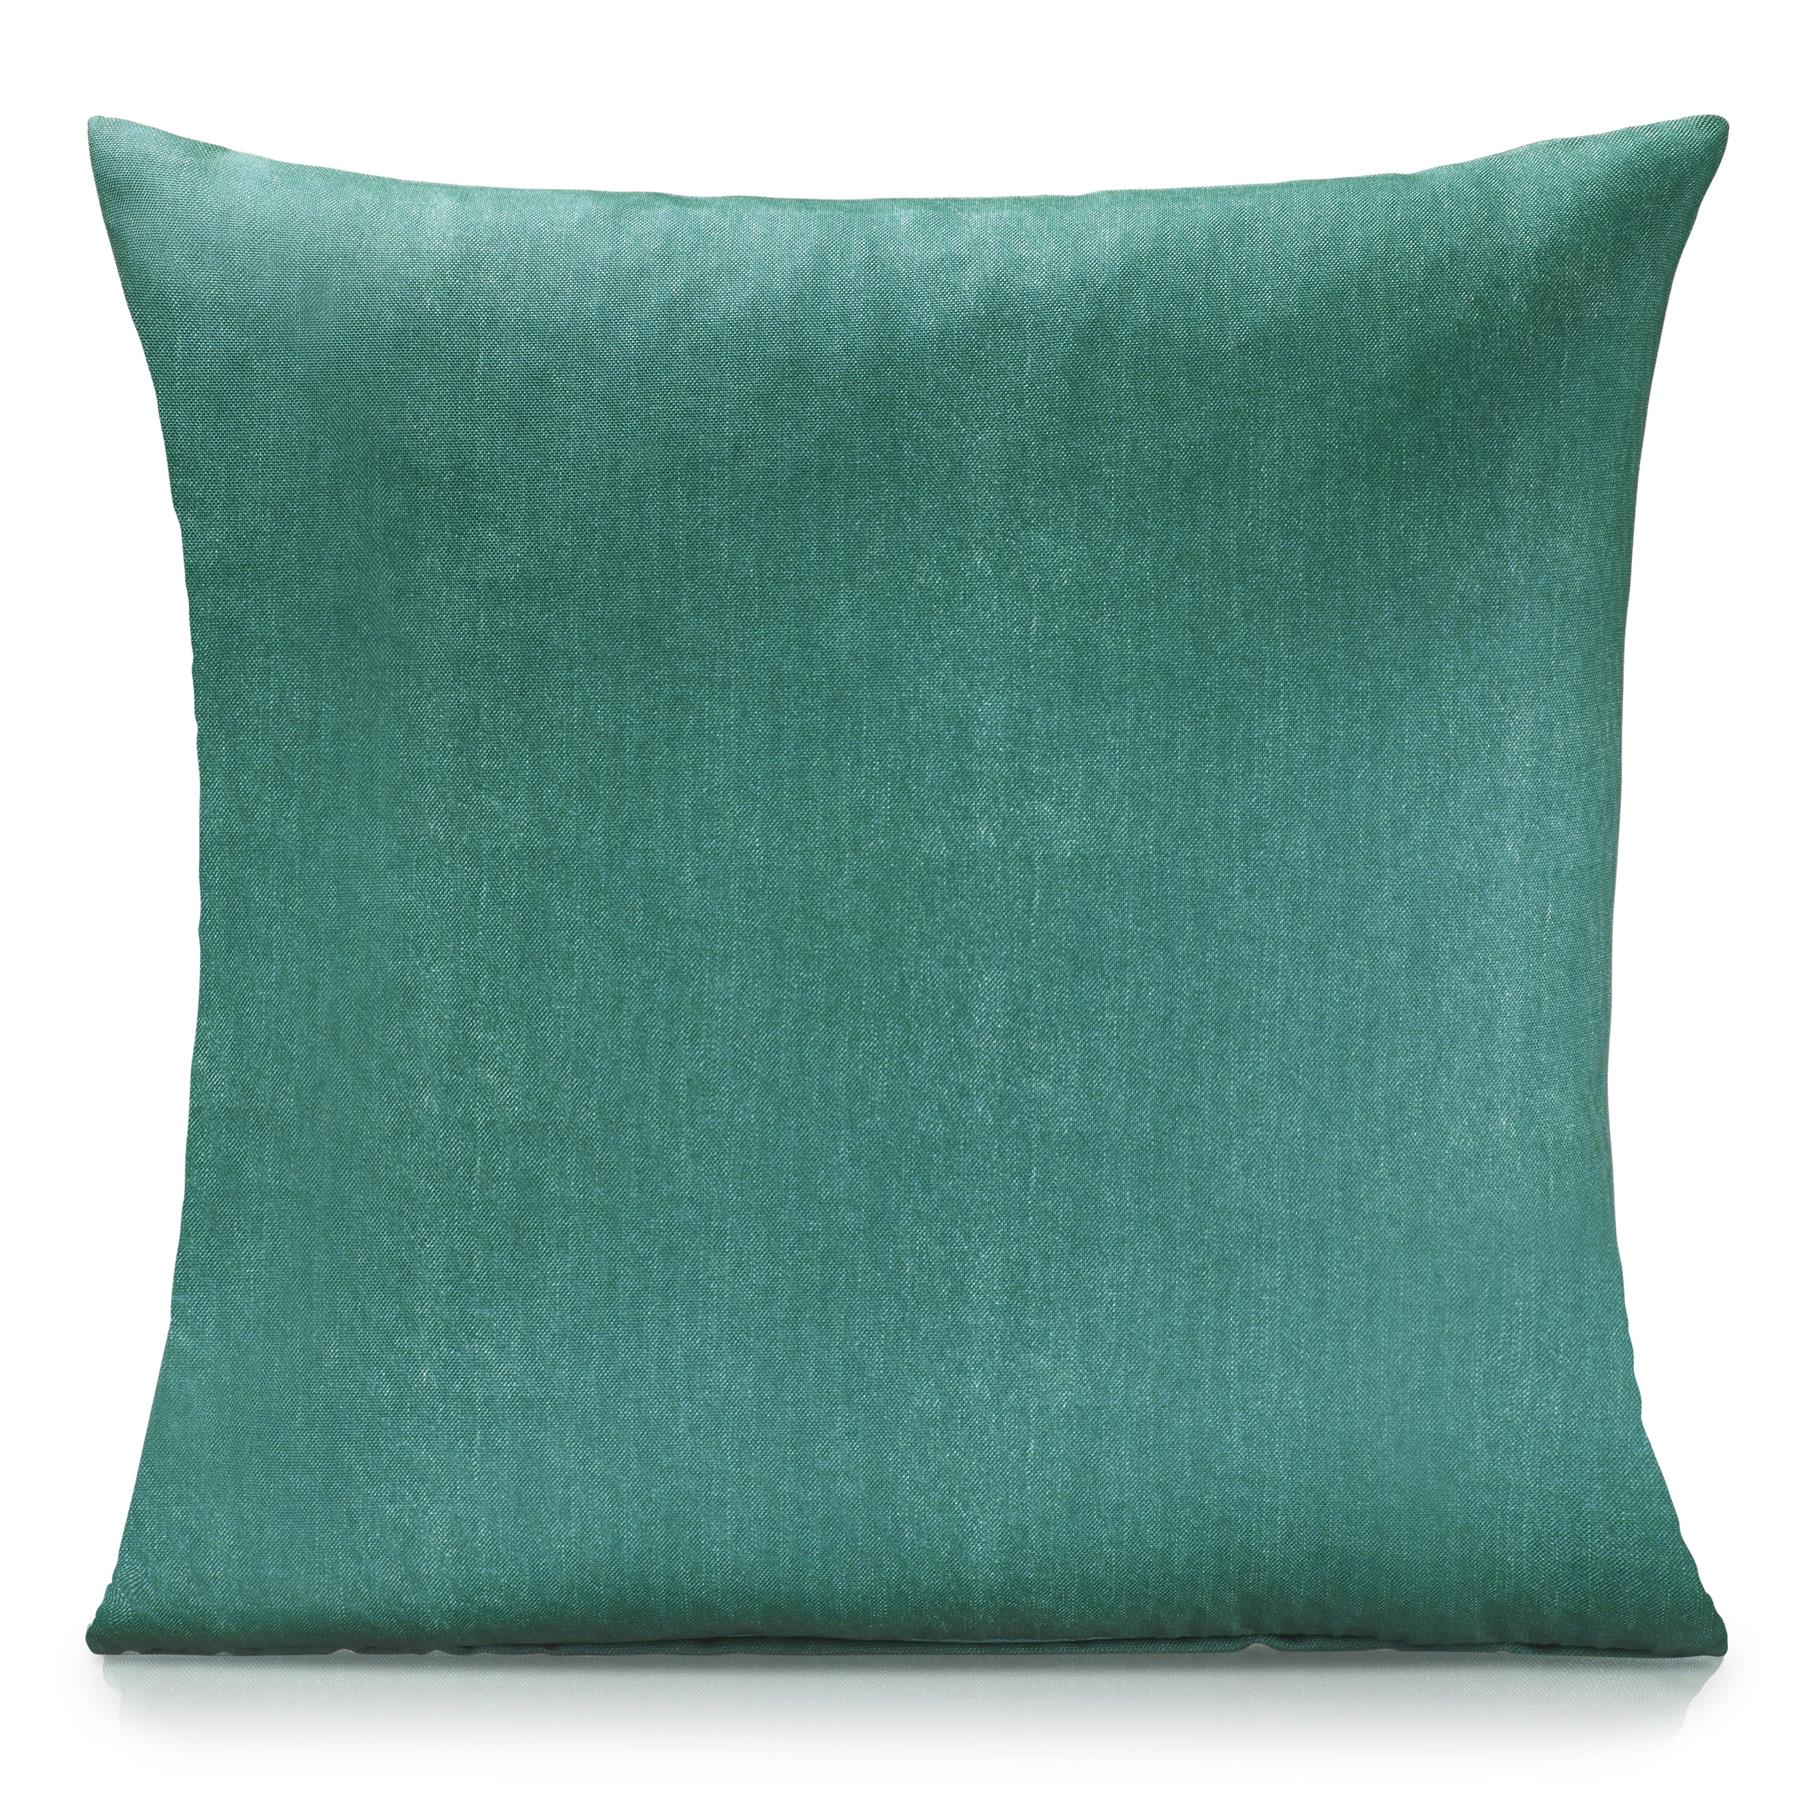 Plain Water Resistant Outdoor Filled Cushion 46cm x 46cm Green